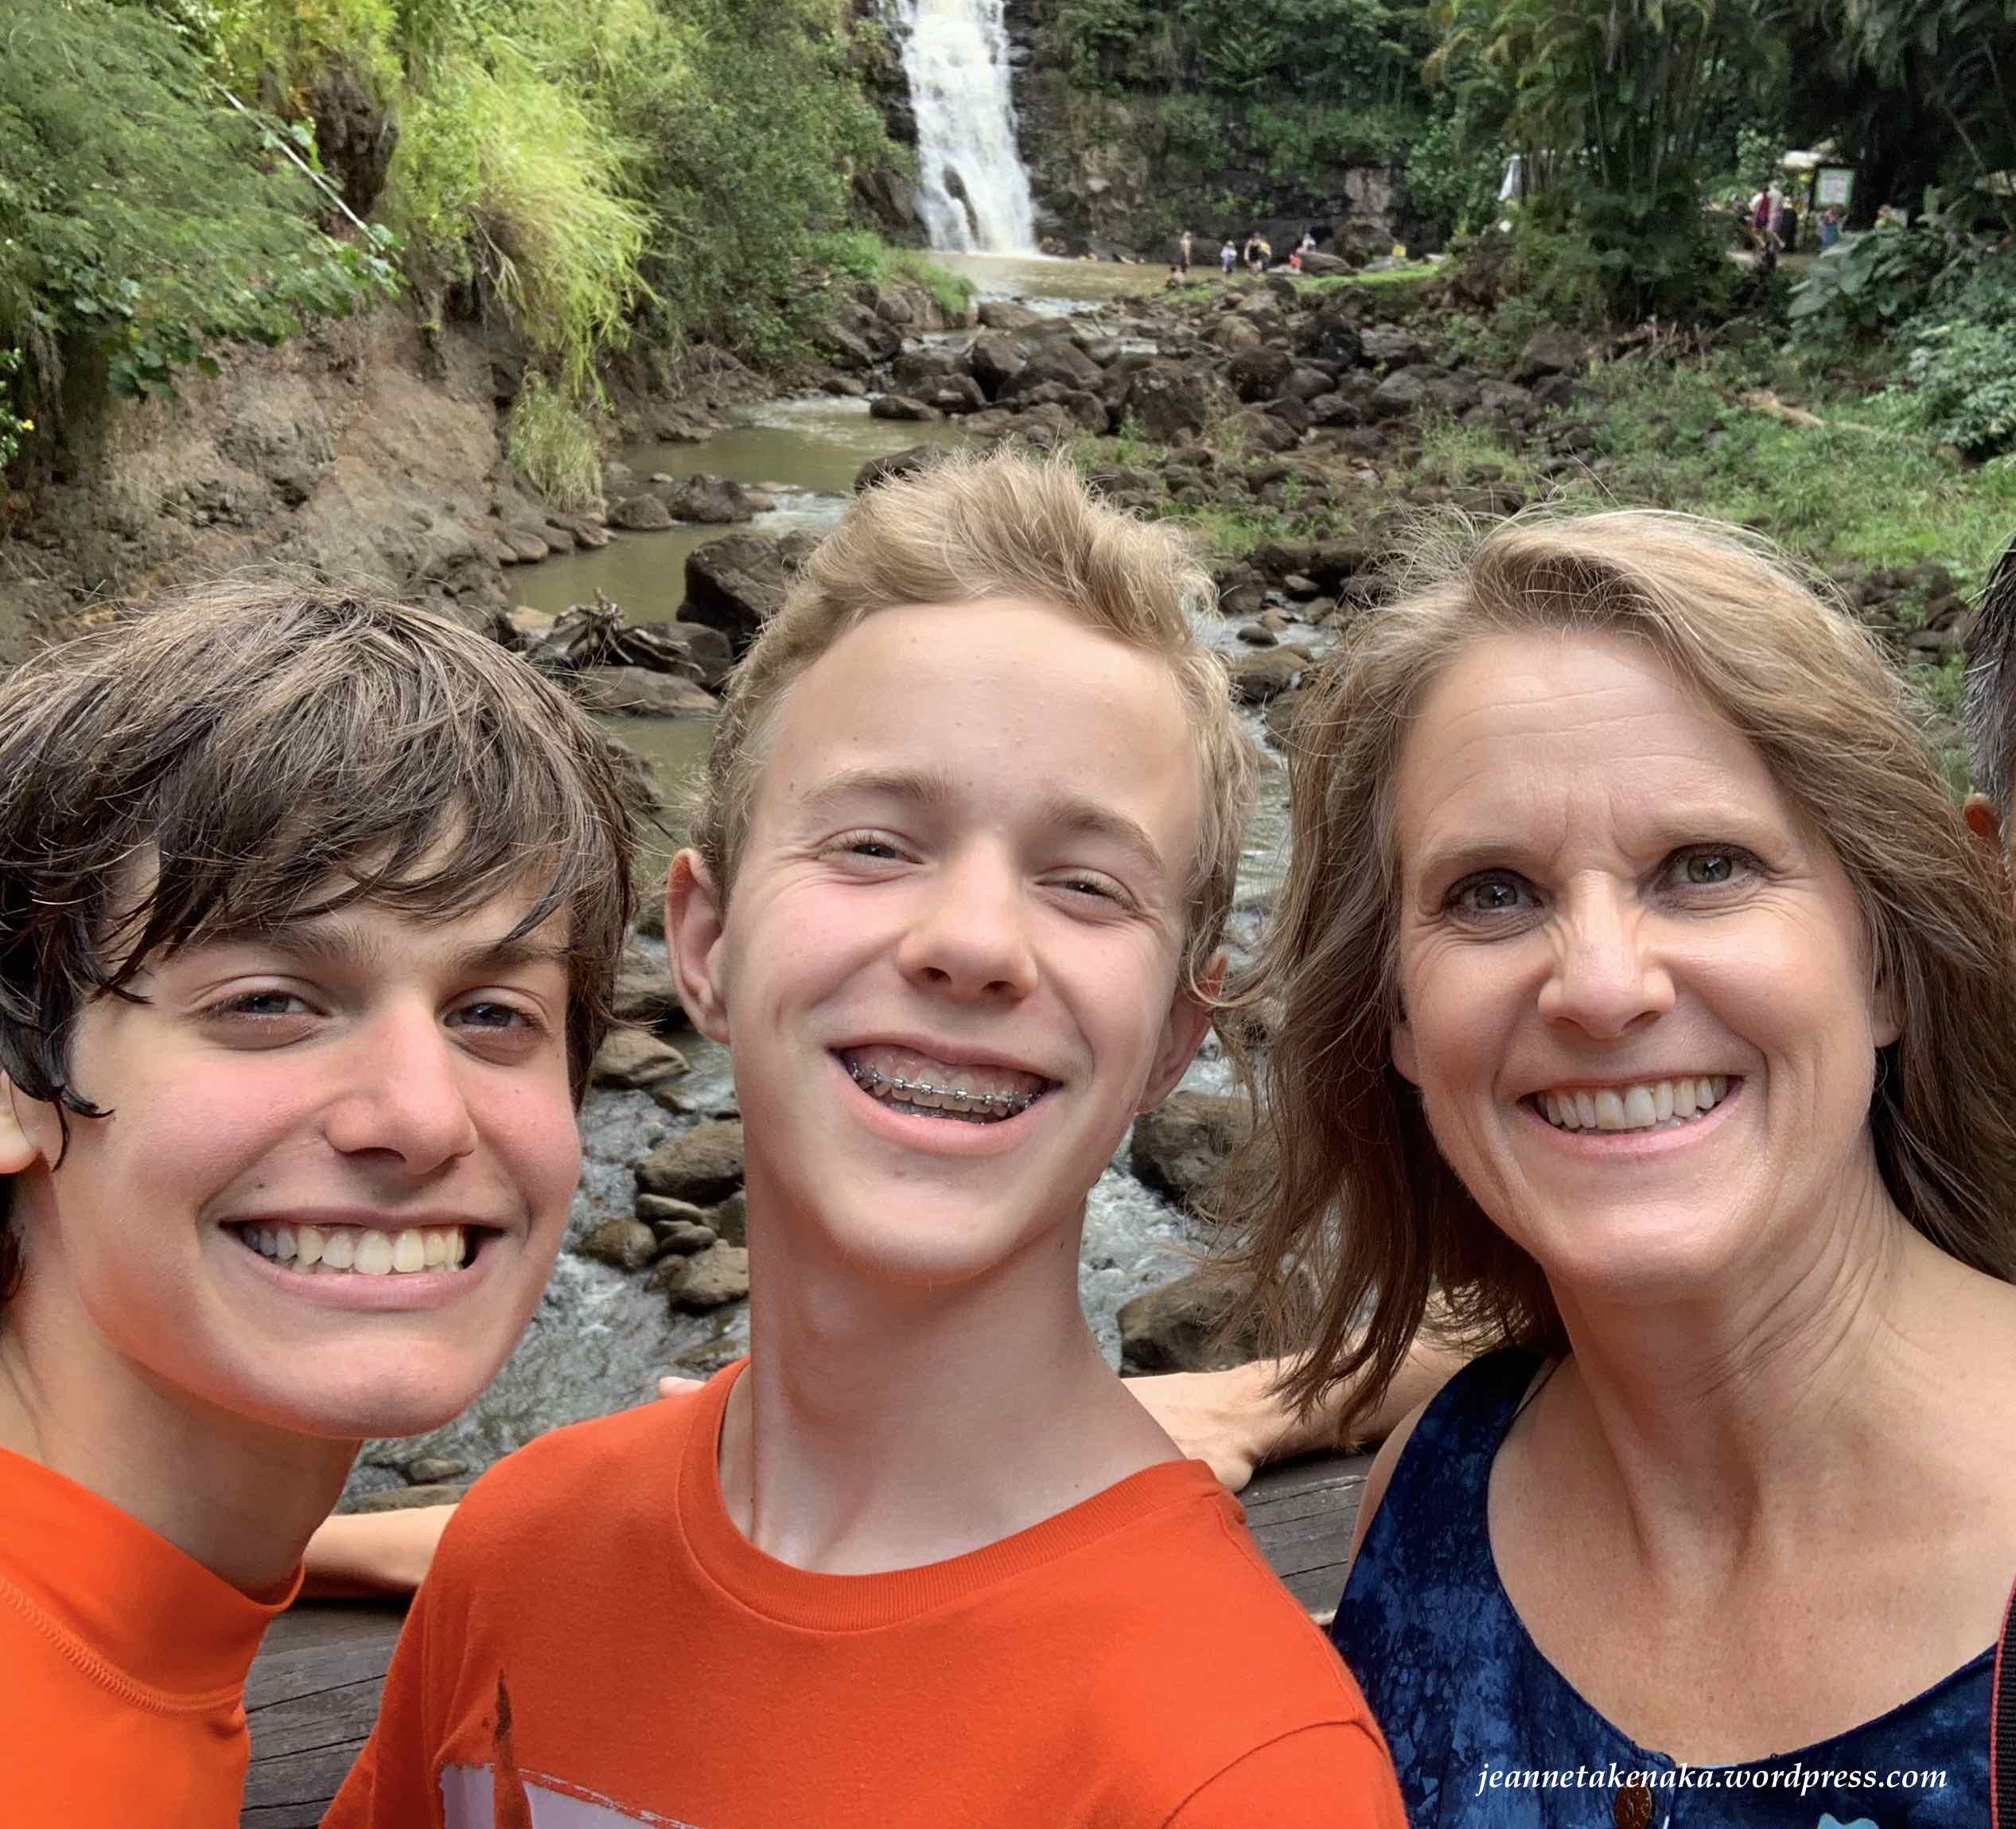 A woman standing with her two sons in front of a water fall